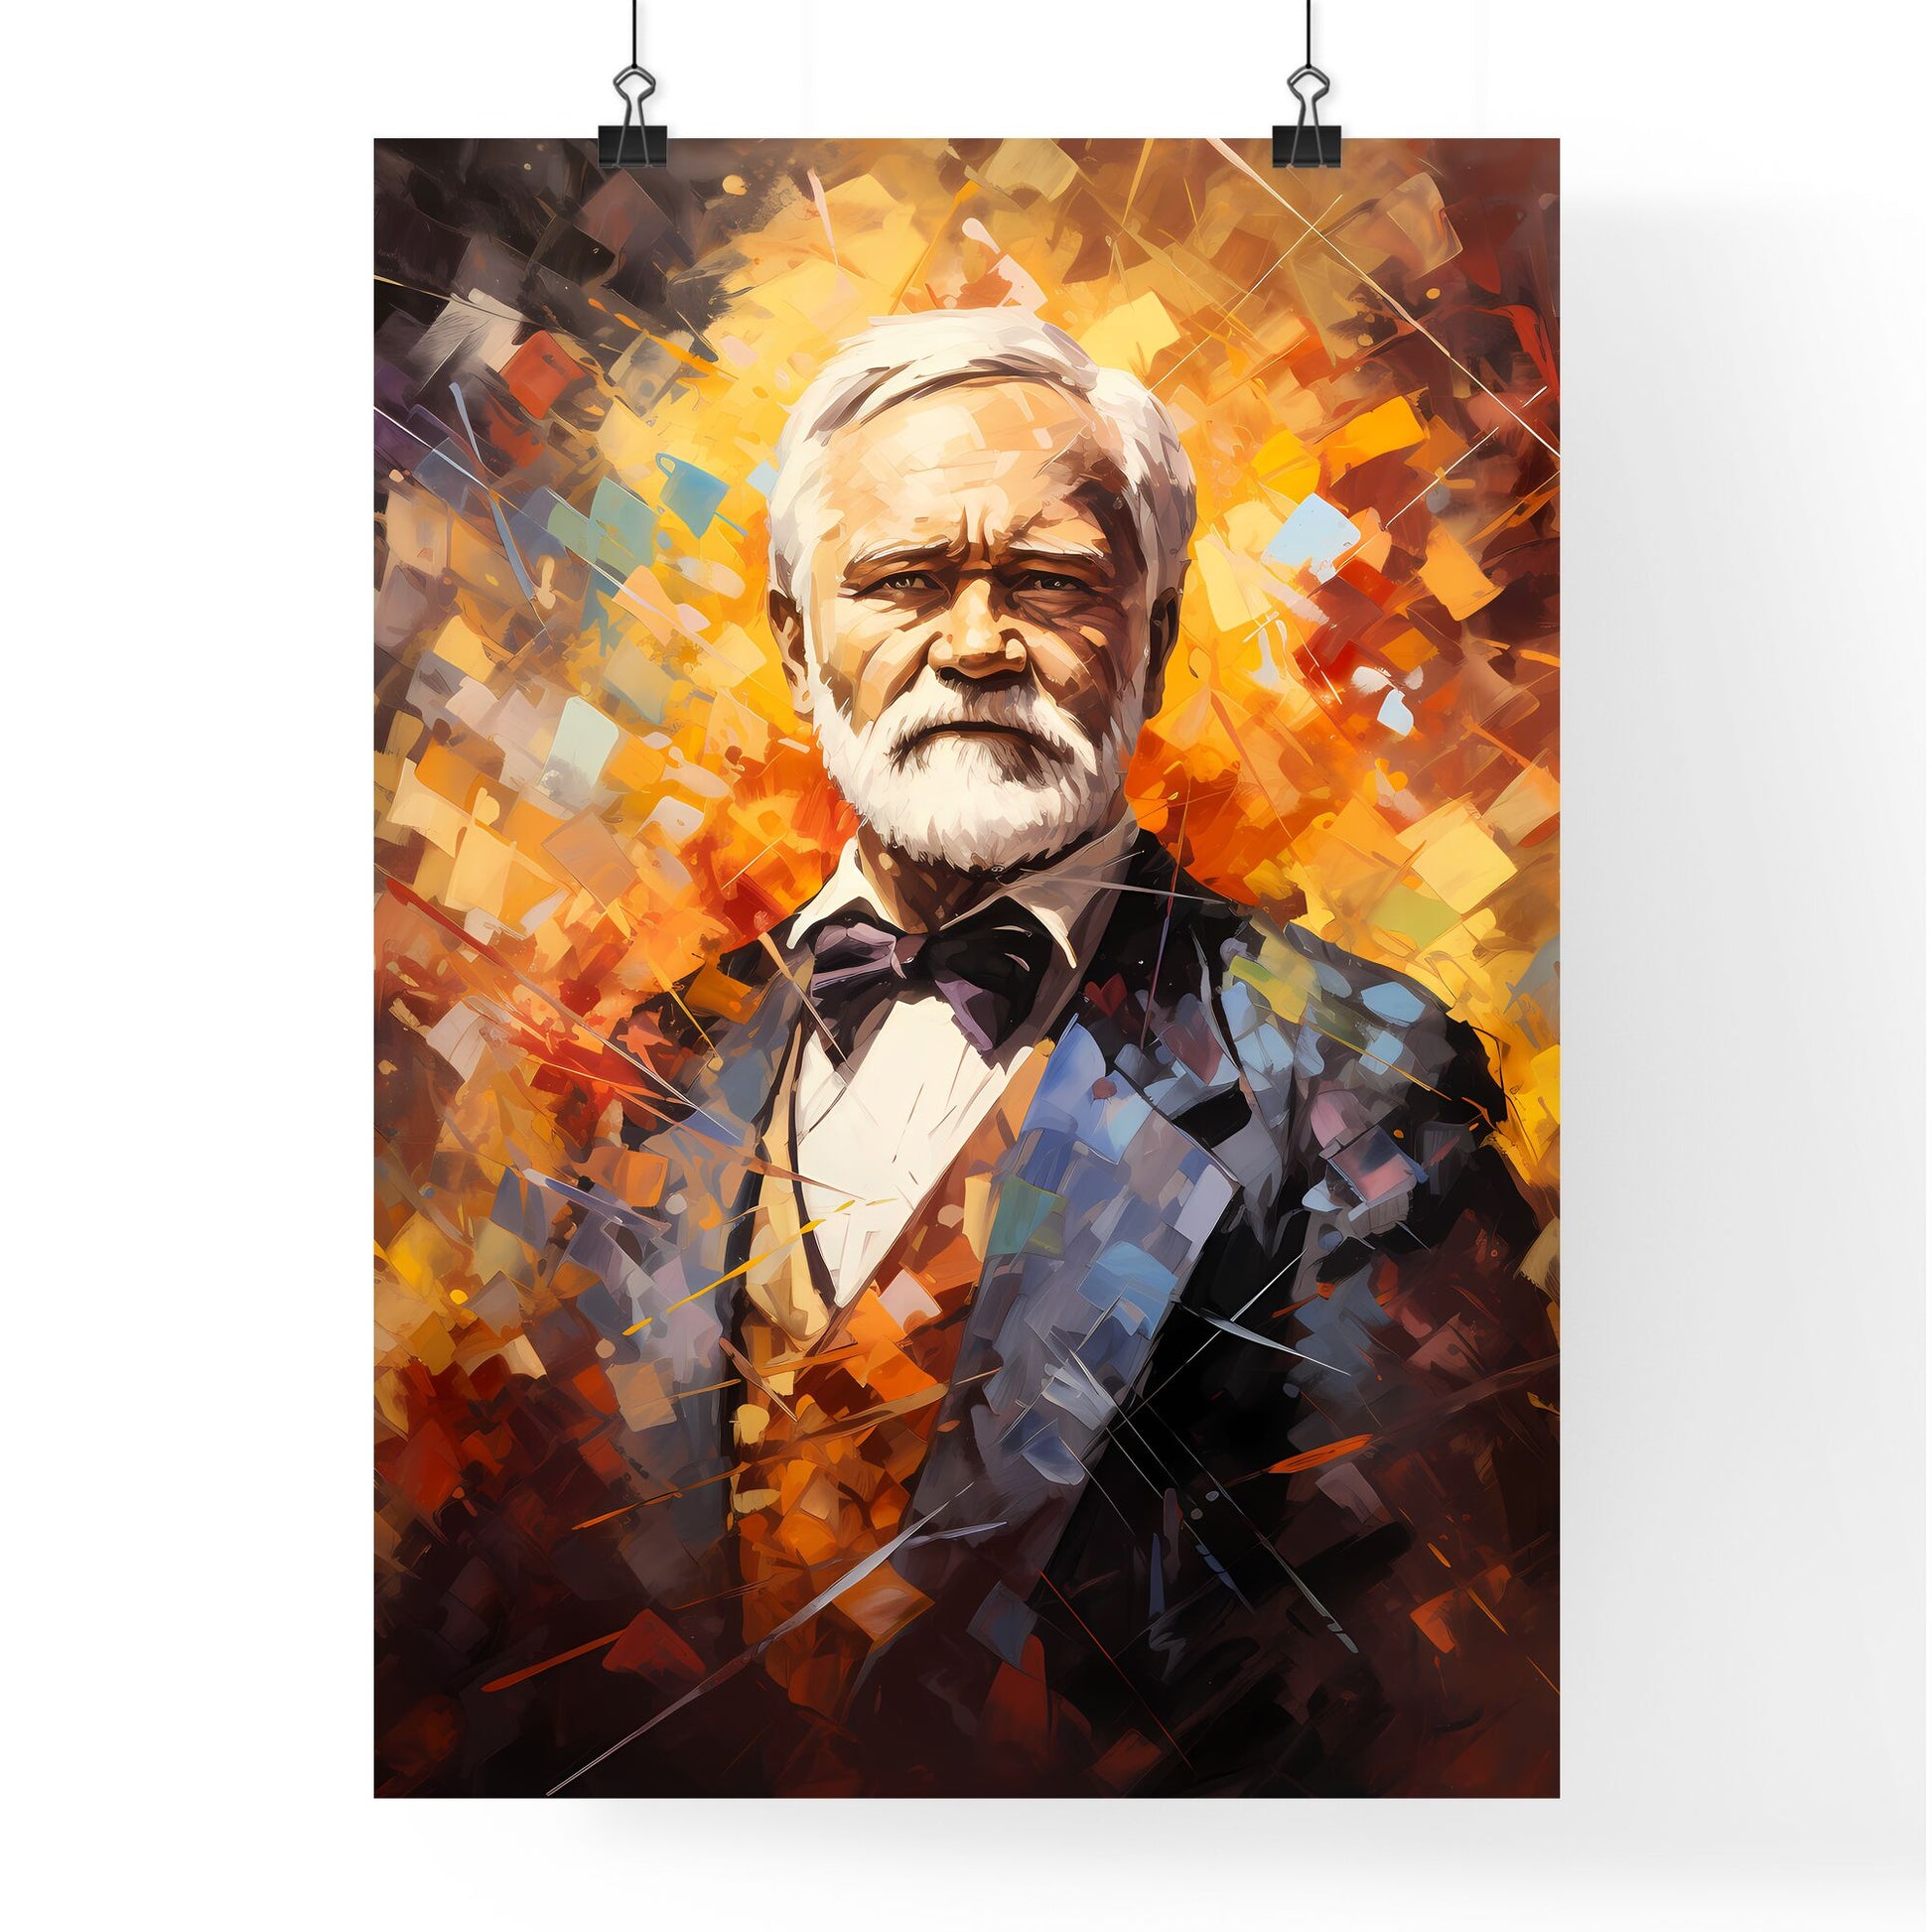 Andrew Carnegie - A Painting Of A Man With A White Beard Default Title